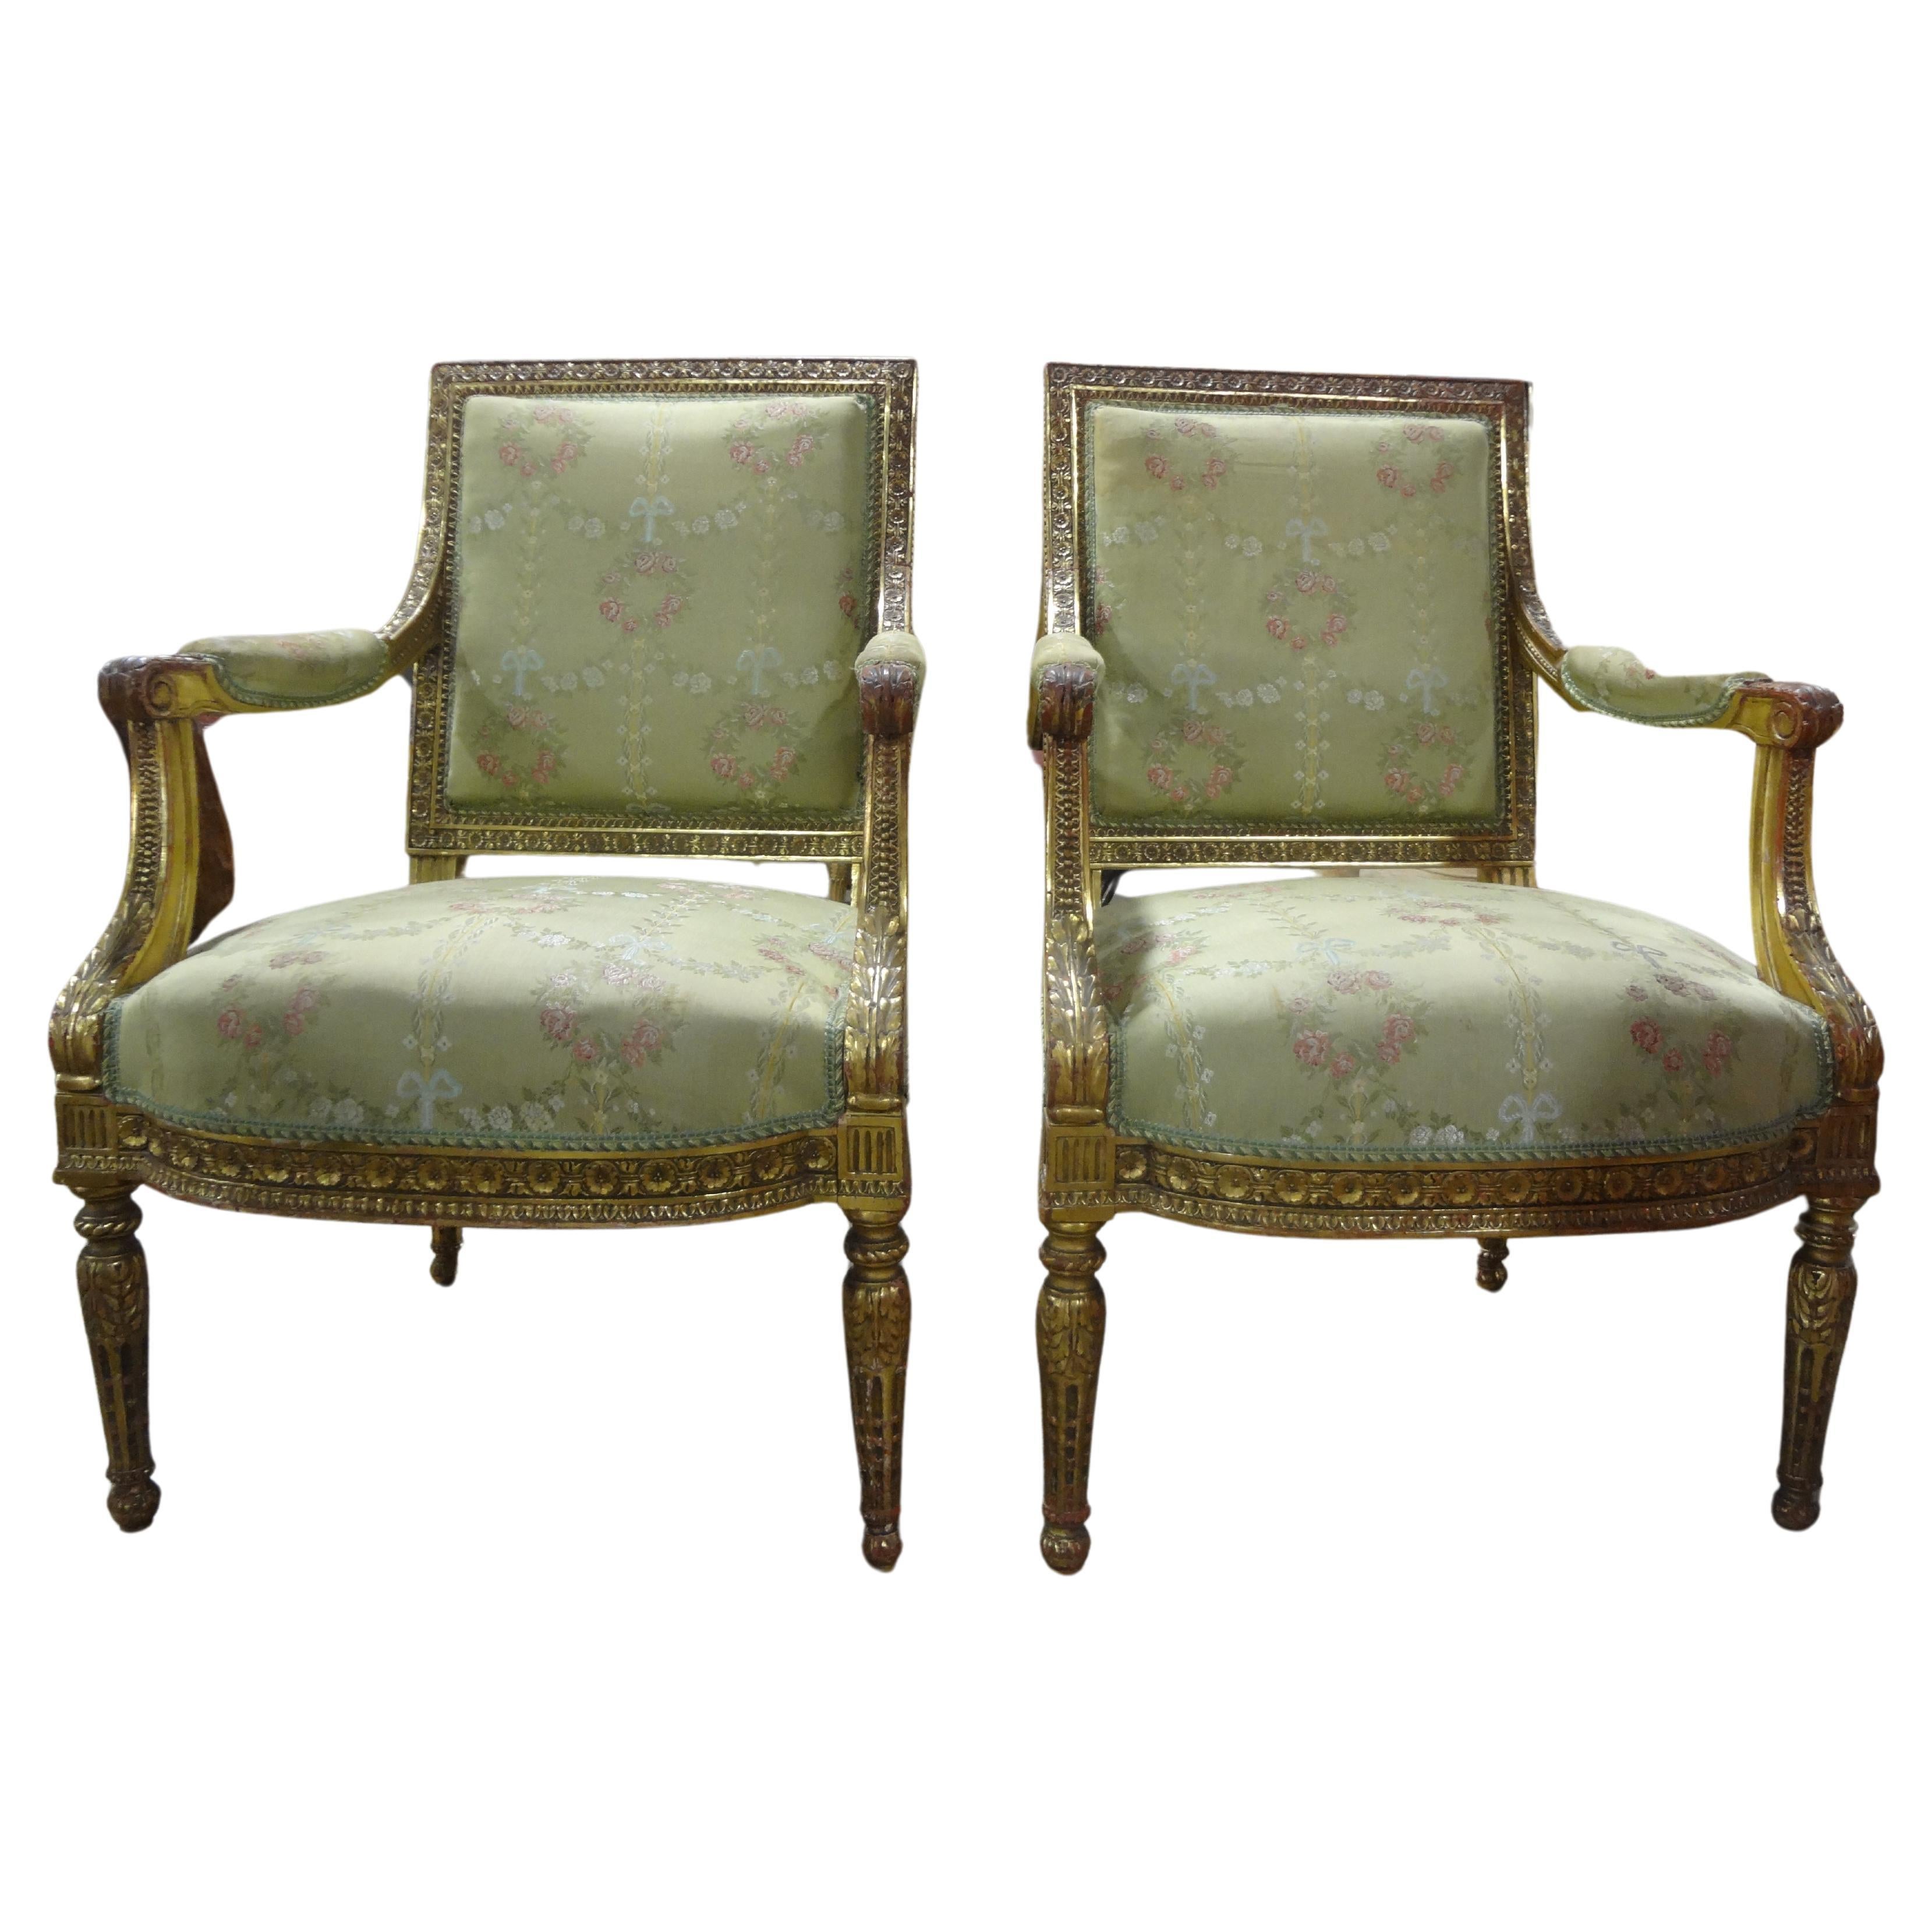 Pair Of 19th Century Italian Louis XVI Style Giltwood Chairs For Sale 7